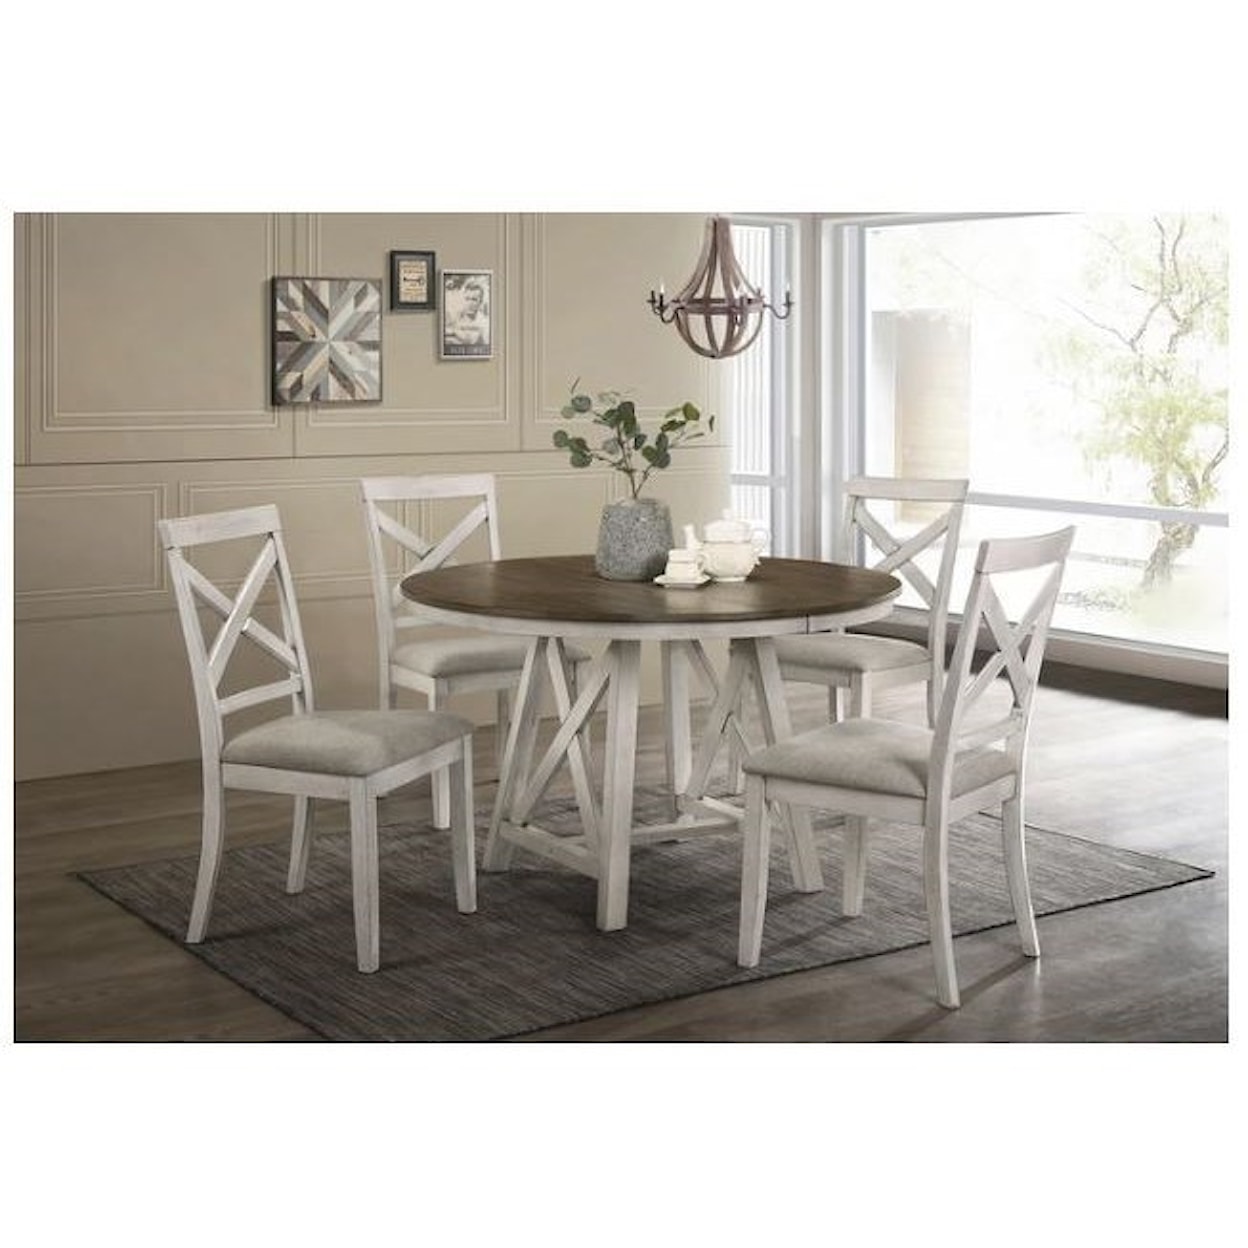 New Classic Furniture SOMERSET 5-Piece Table and Chair Set